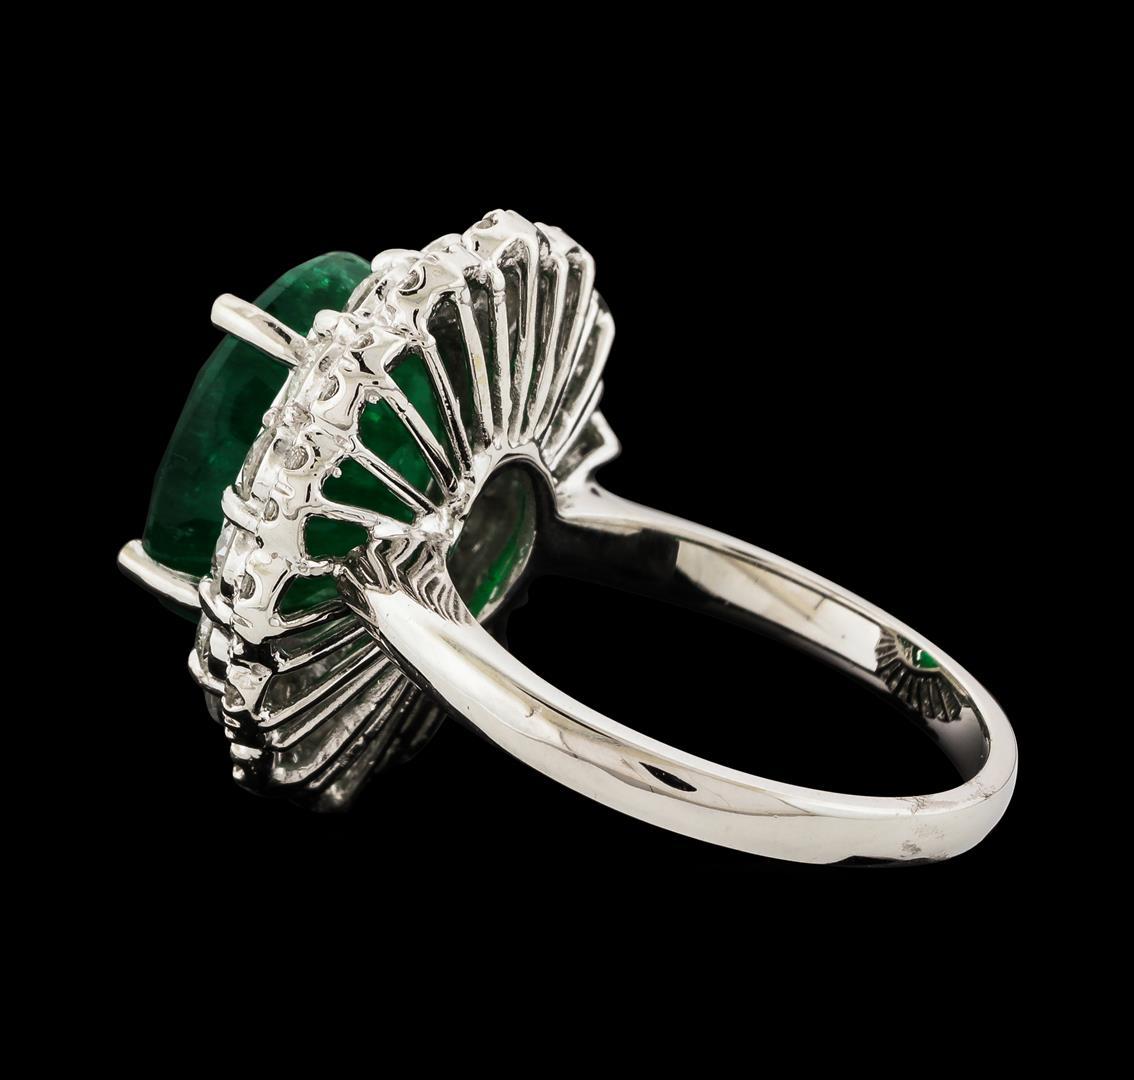 6.06 ctw Emerald and Diamond Ring - 14KT White Gold